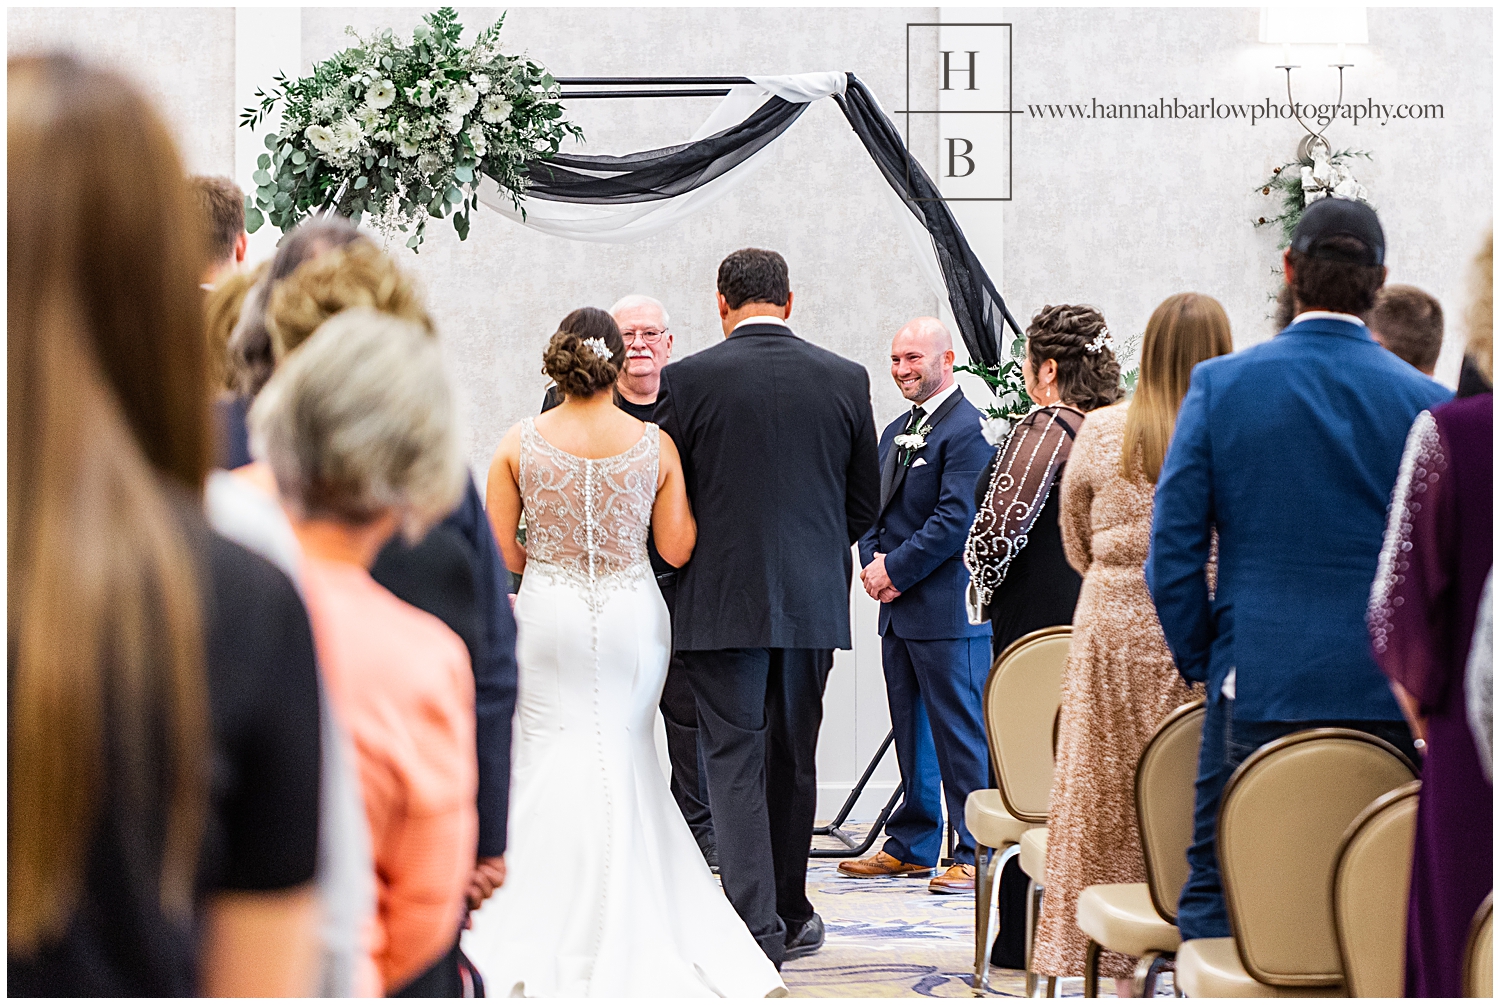 Photo from the back of wedding ceremony with groom looking at bride being escorted by father.